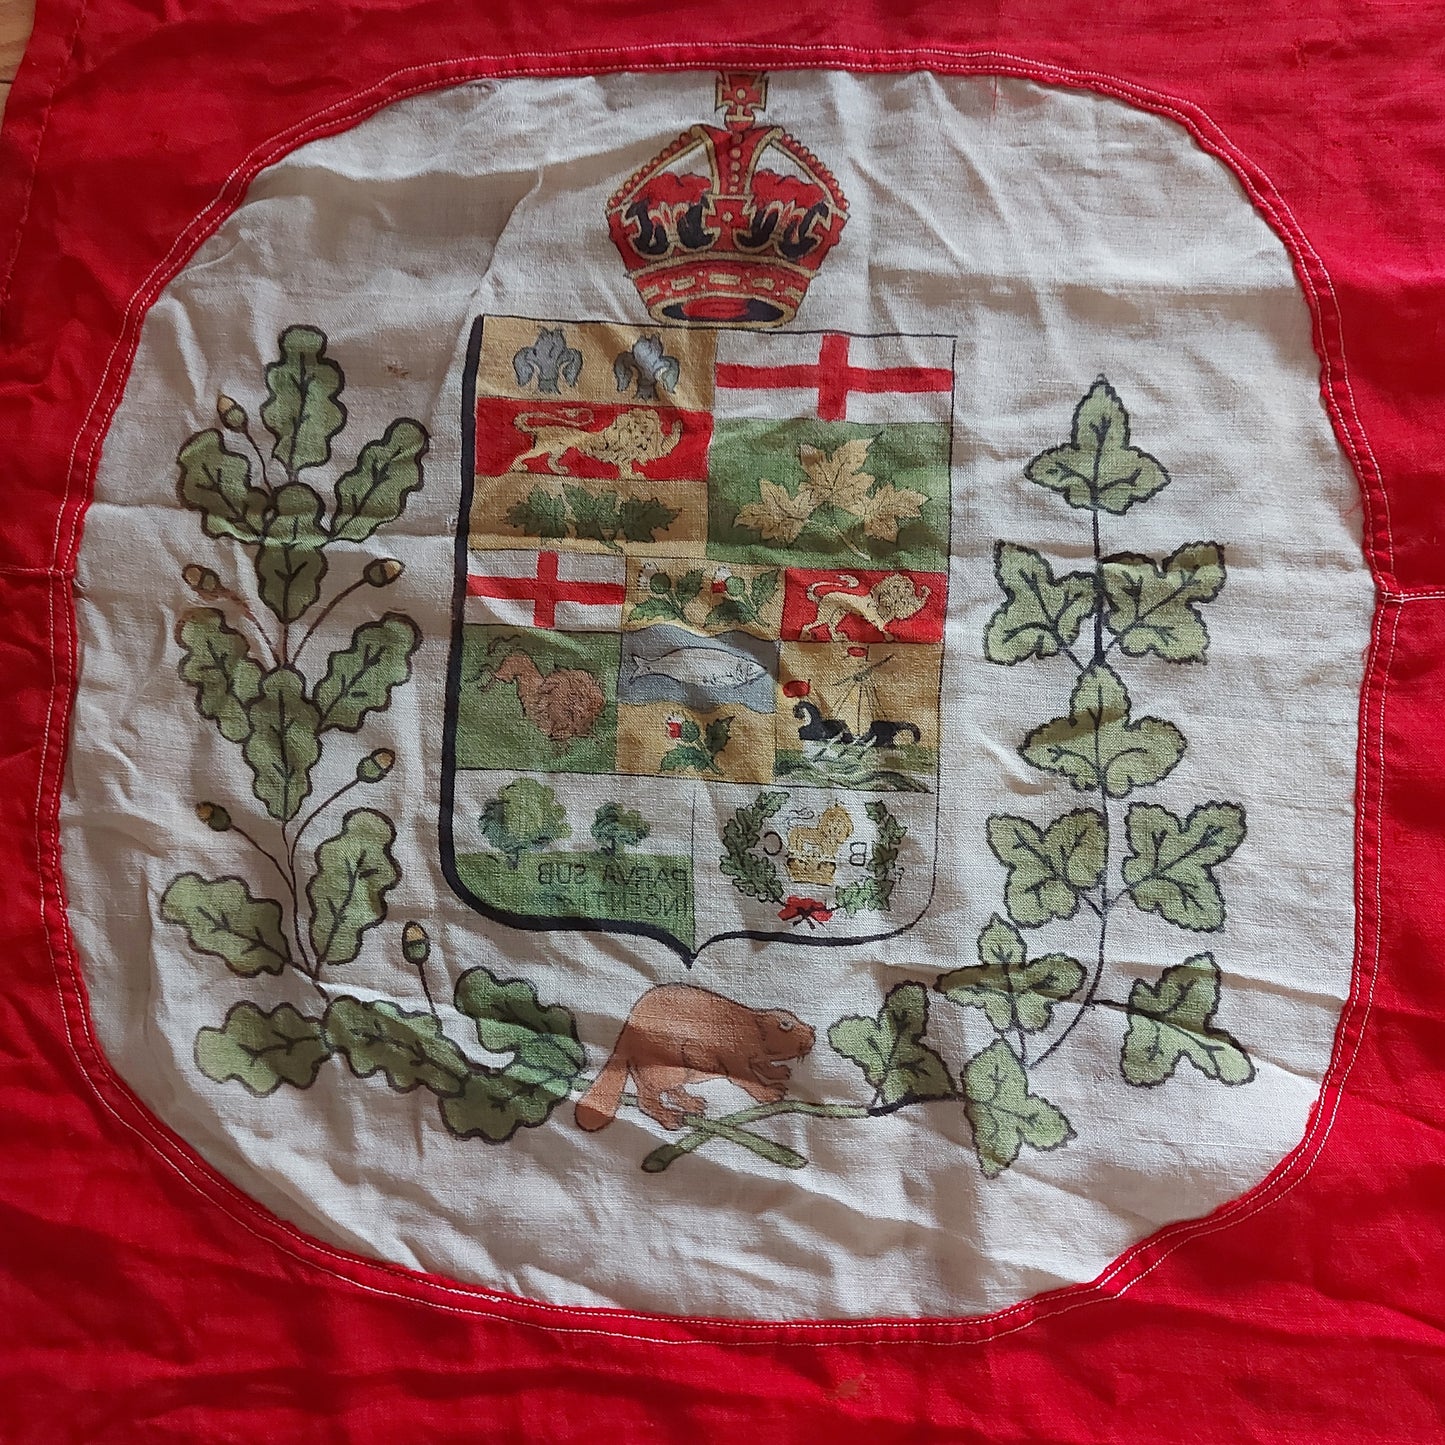 WW1 Canadian Red Ensign Flag 76 X 44 Inches